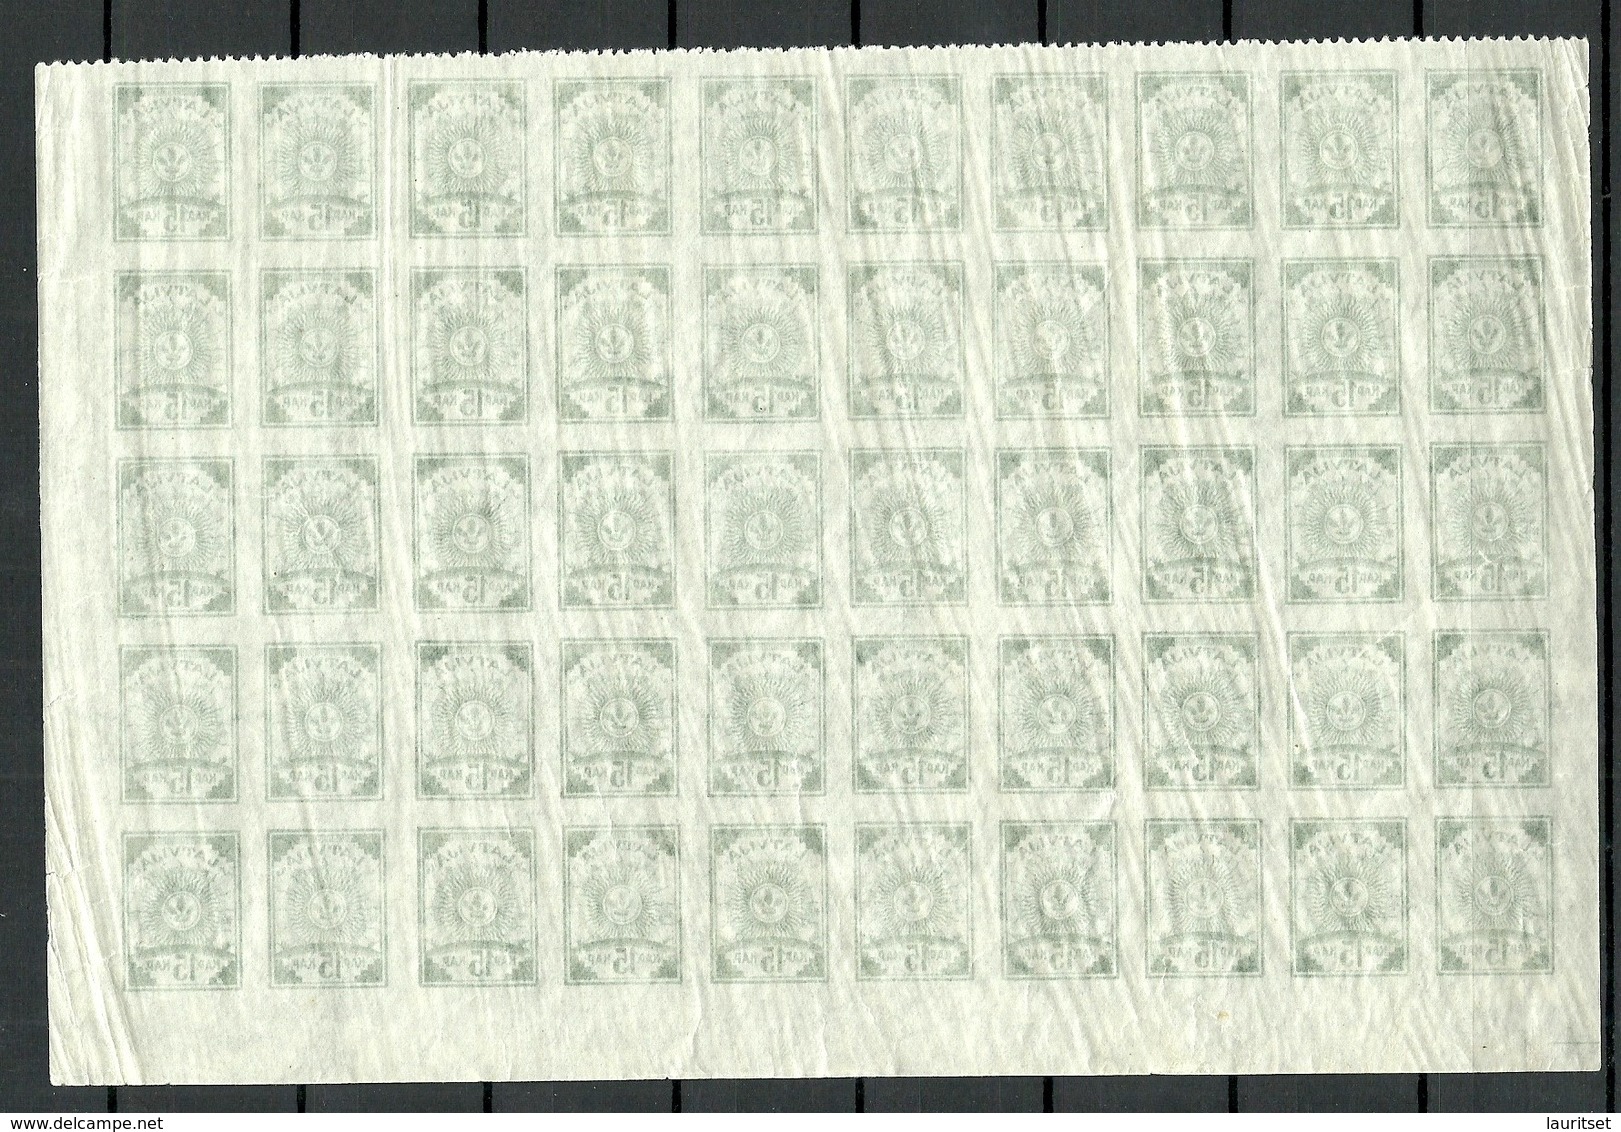 LETTLAND Latvia 1919 Michel 9 Half Of Sheet Of 50 MNH Incl Upper Row Perforated 9 3/4 - Letonia